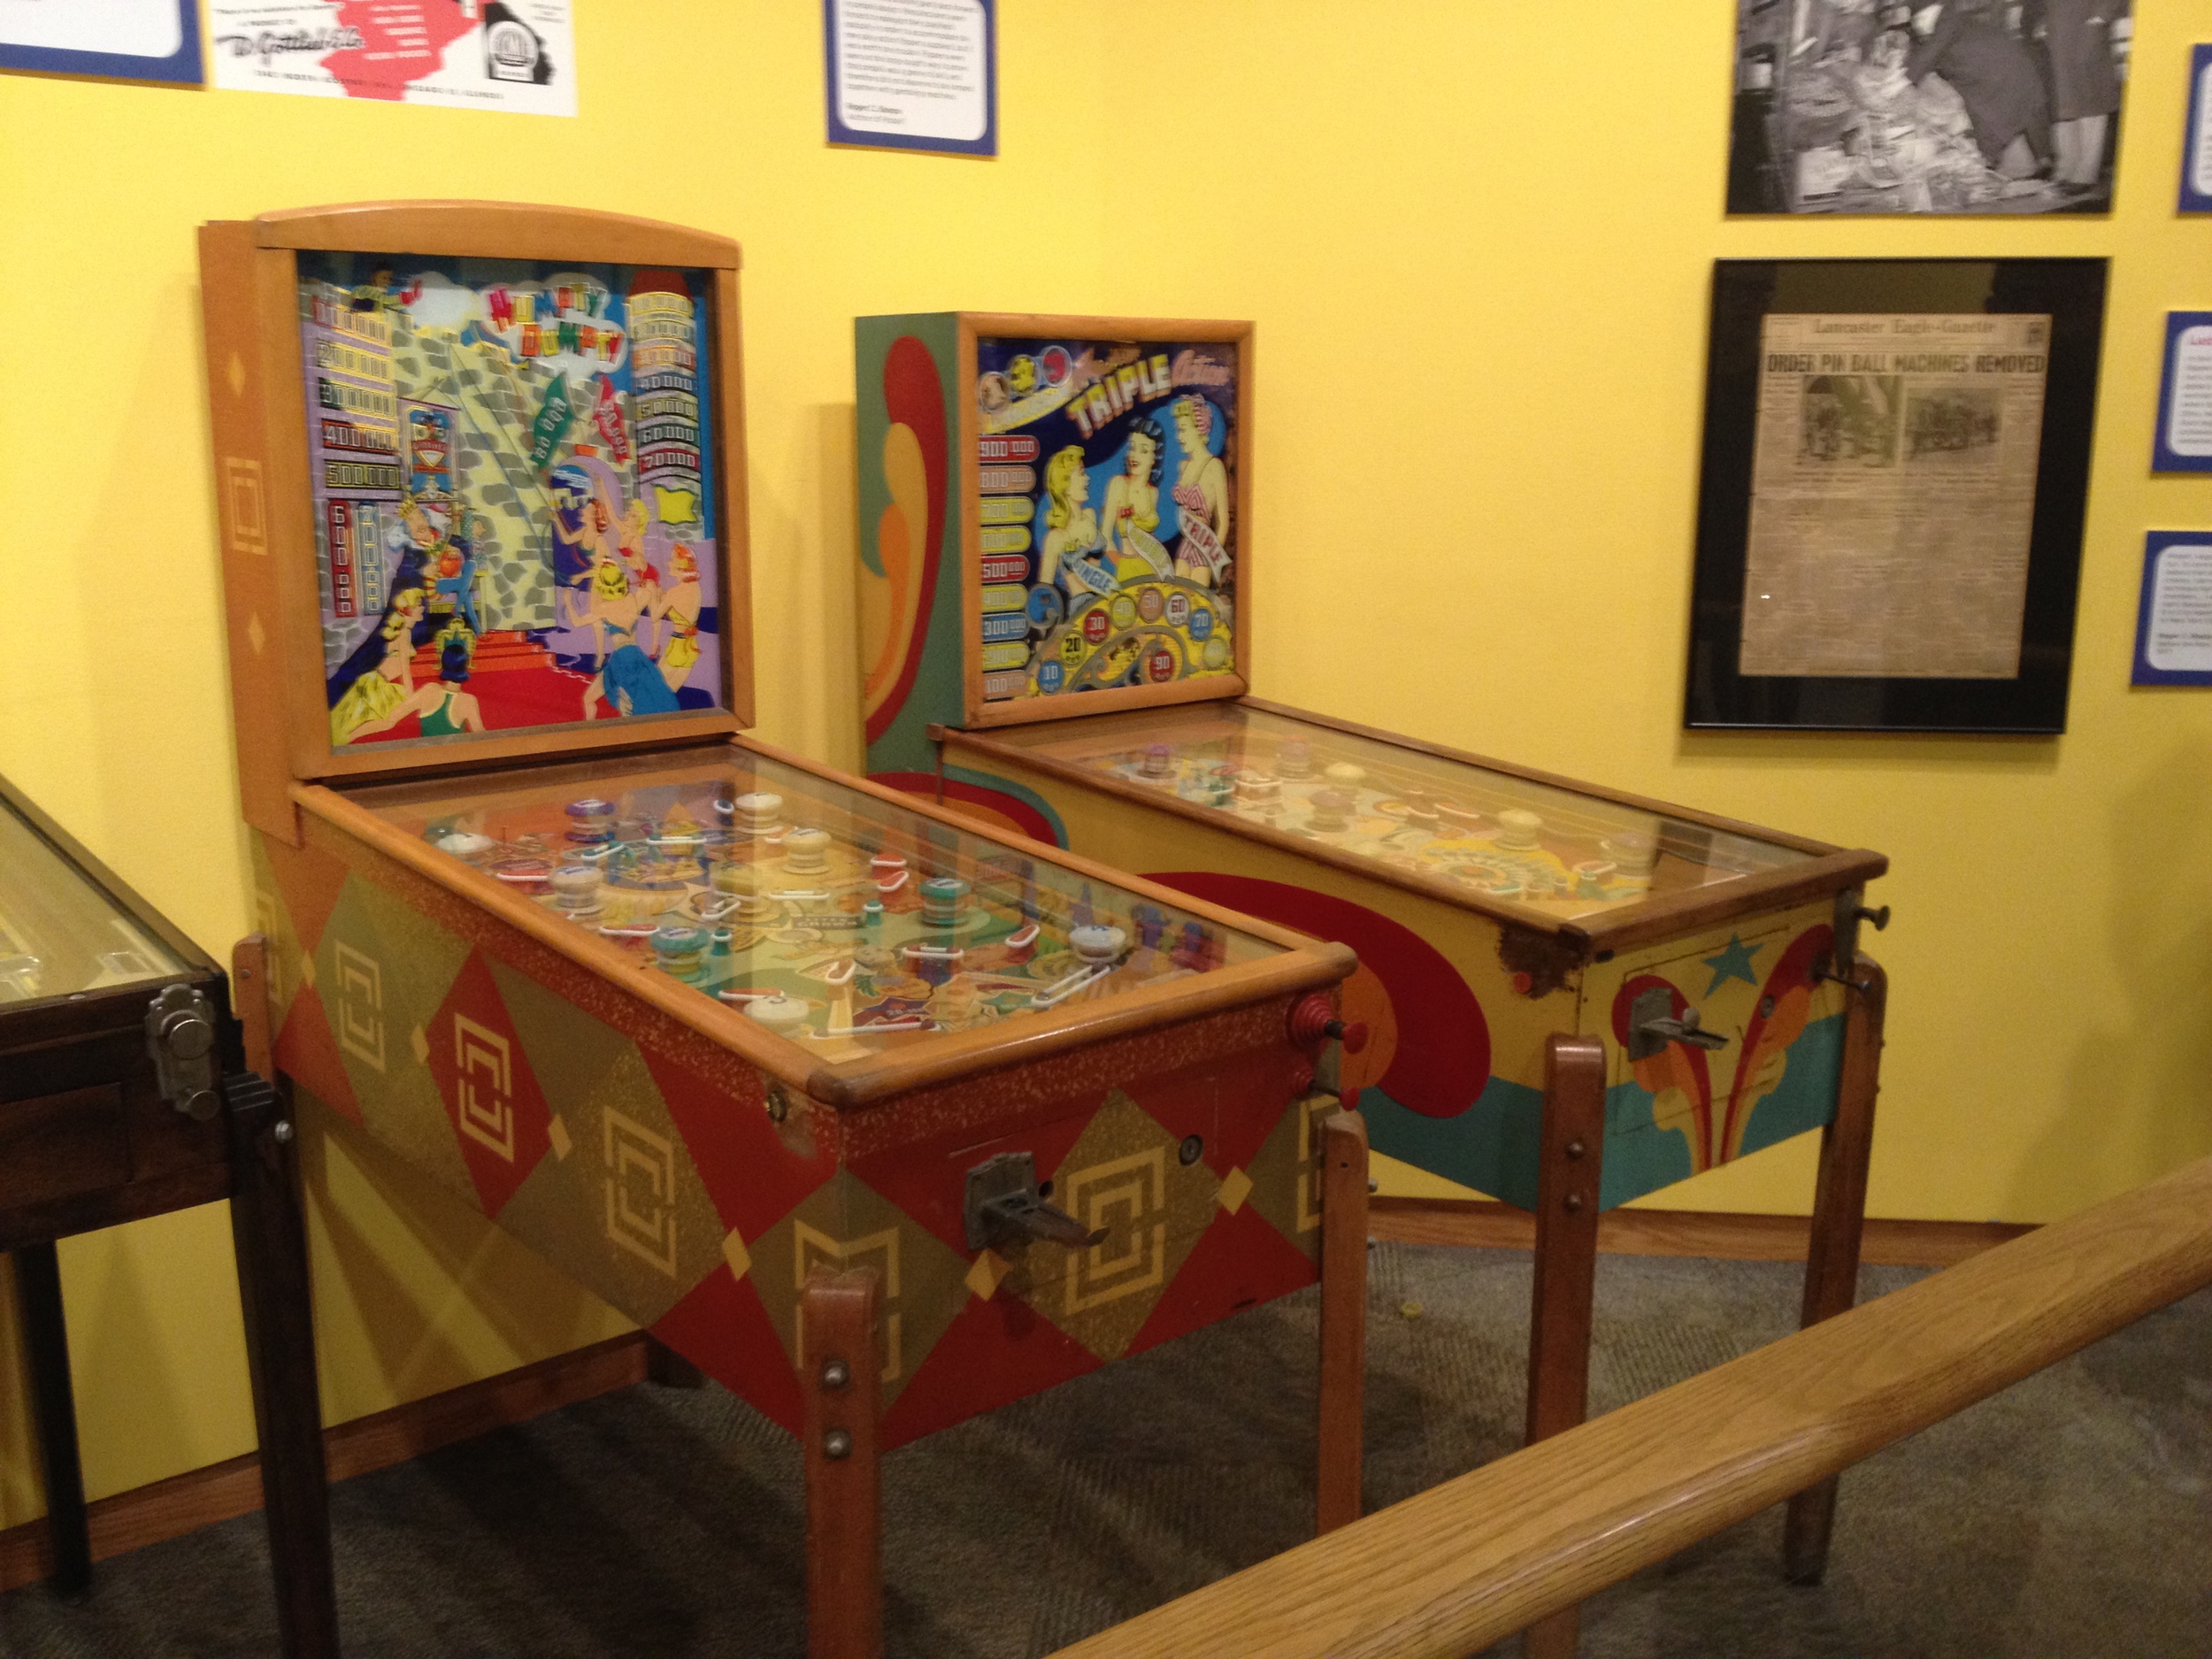  Preserved, original Humpty Dumpty pinball machine in the Boardwalk exhibit at the Strong National Museum of Play, Rochester, NY. 